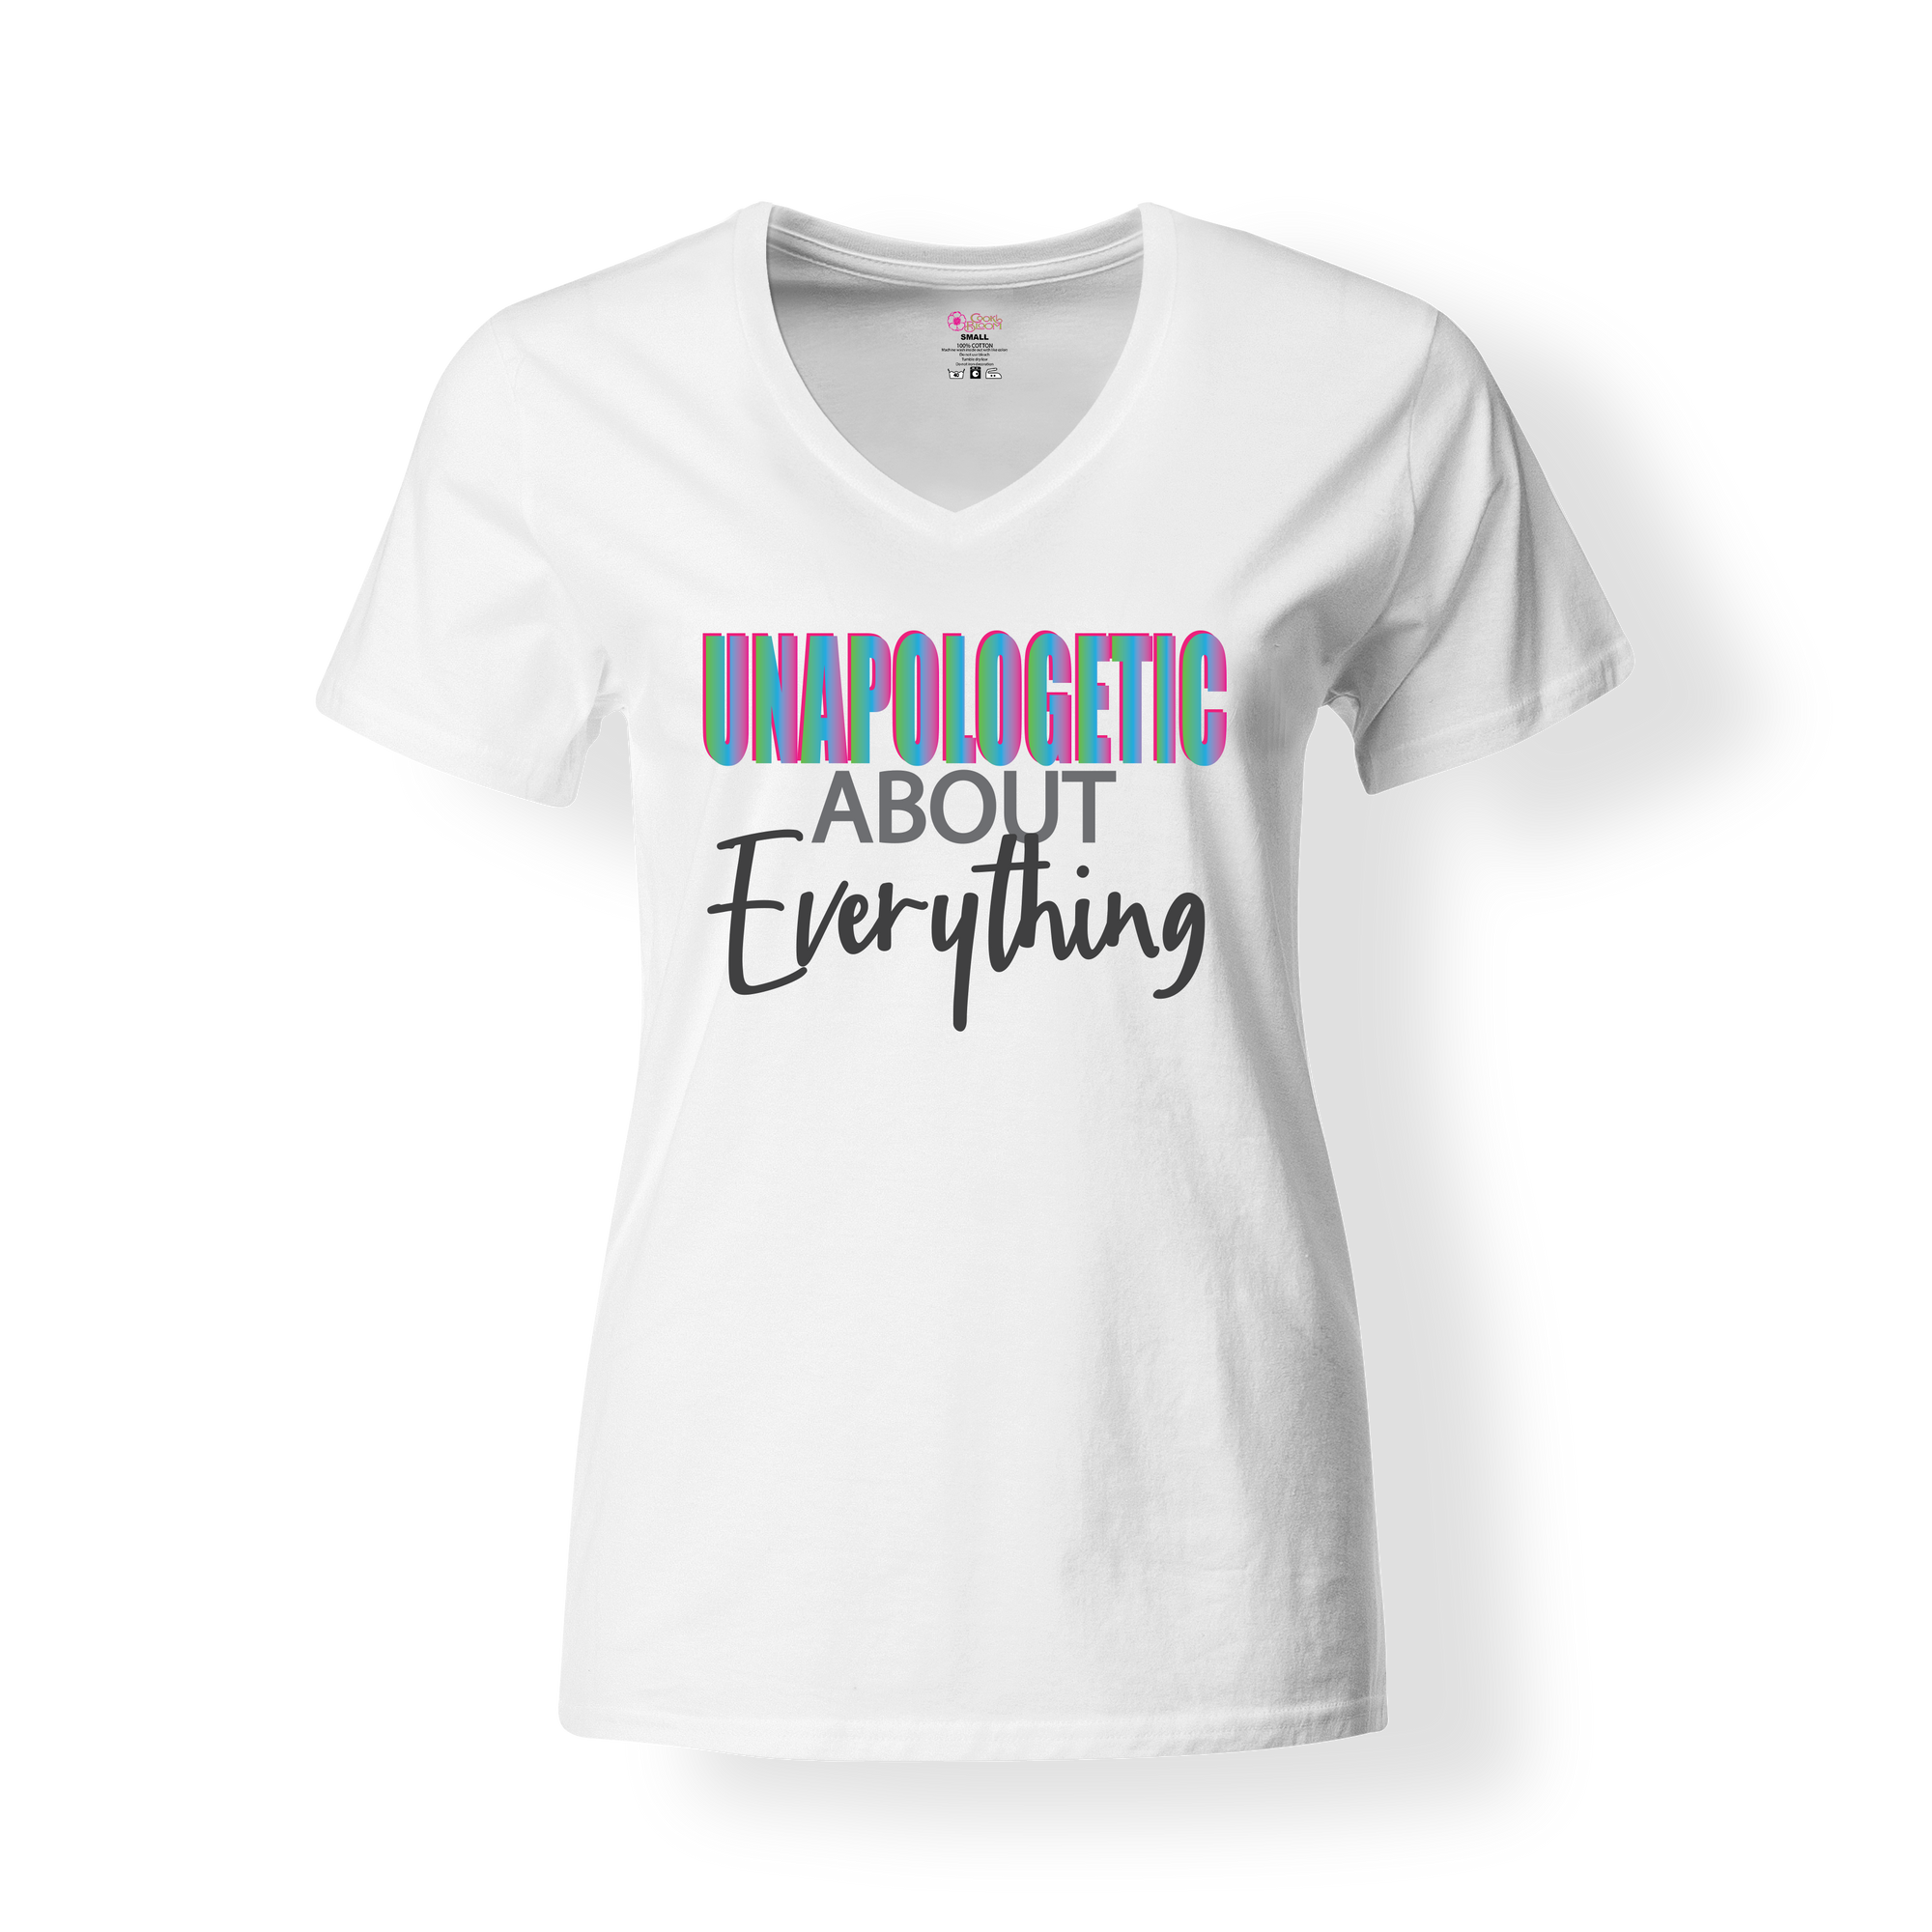 CookiBloom shirts S / Black / White Unapologetic Shirt